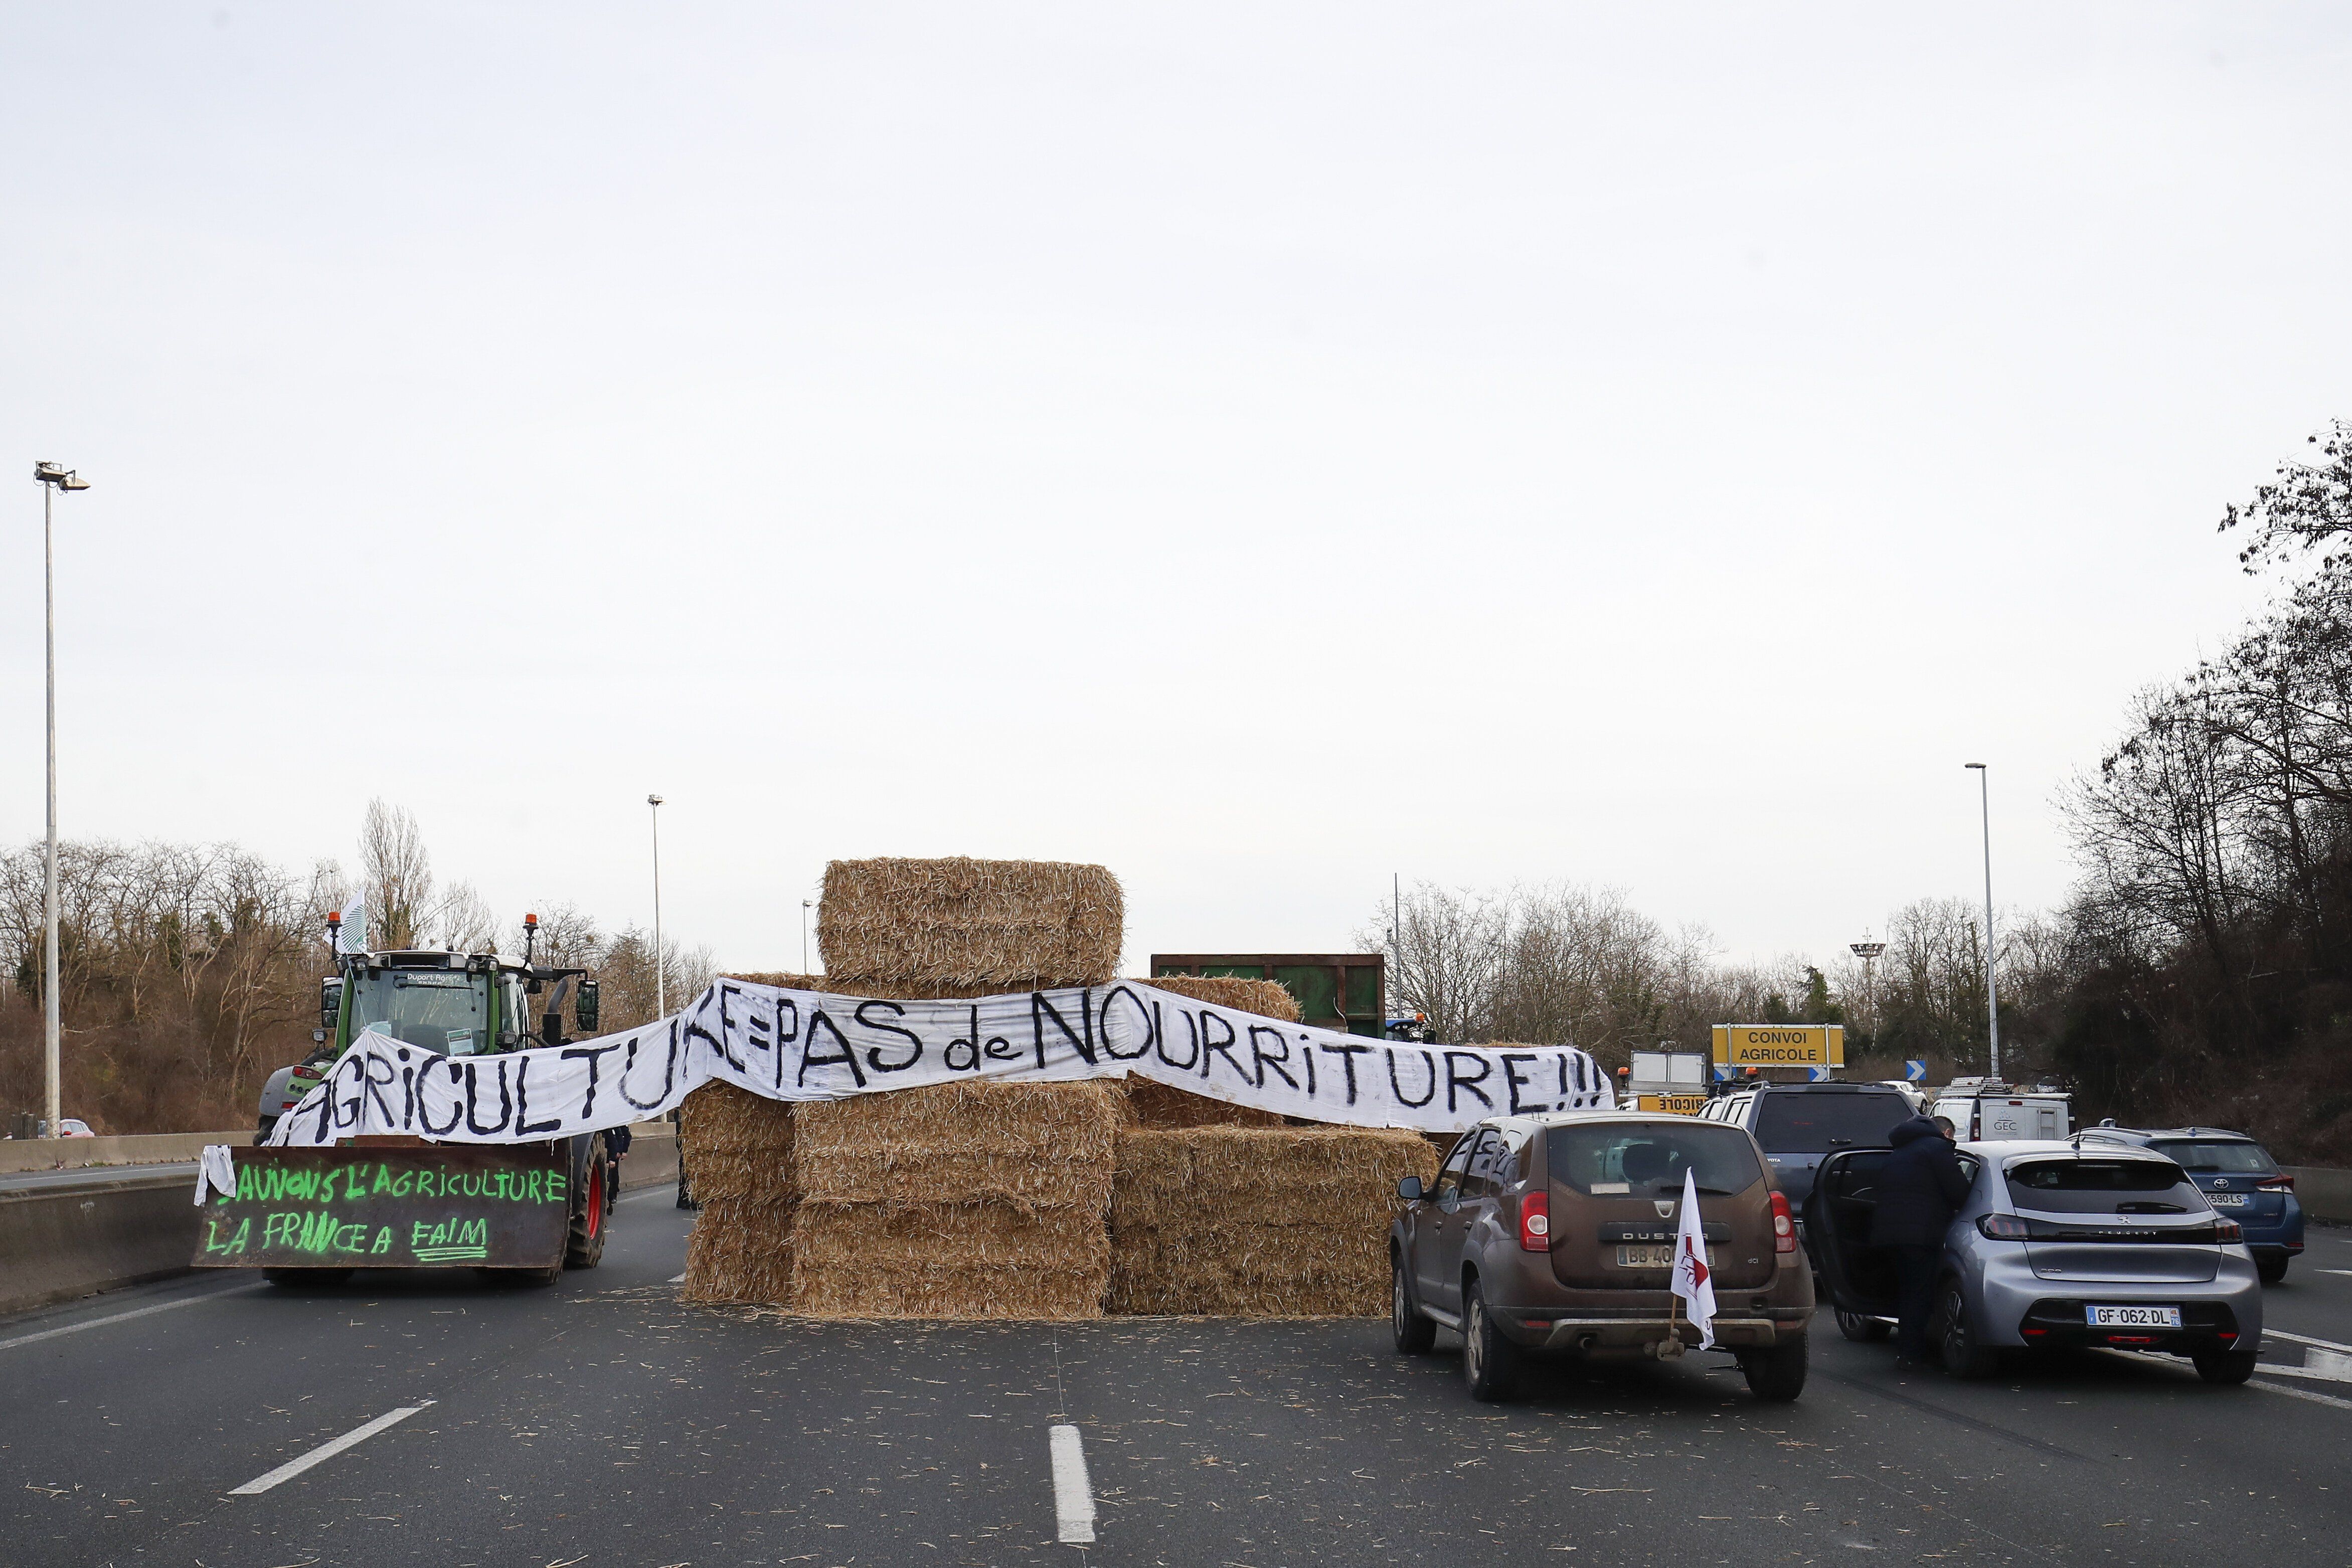 Traffic jam from French farmer protests.